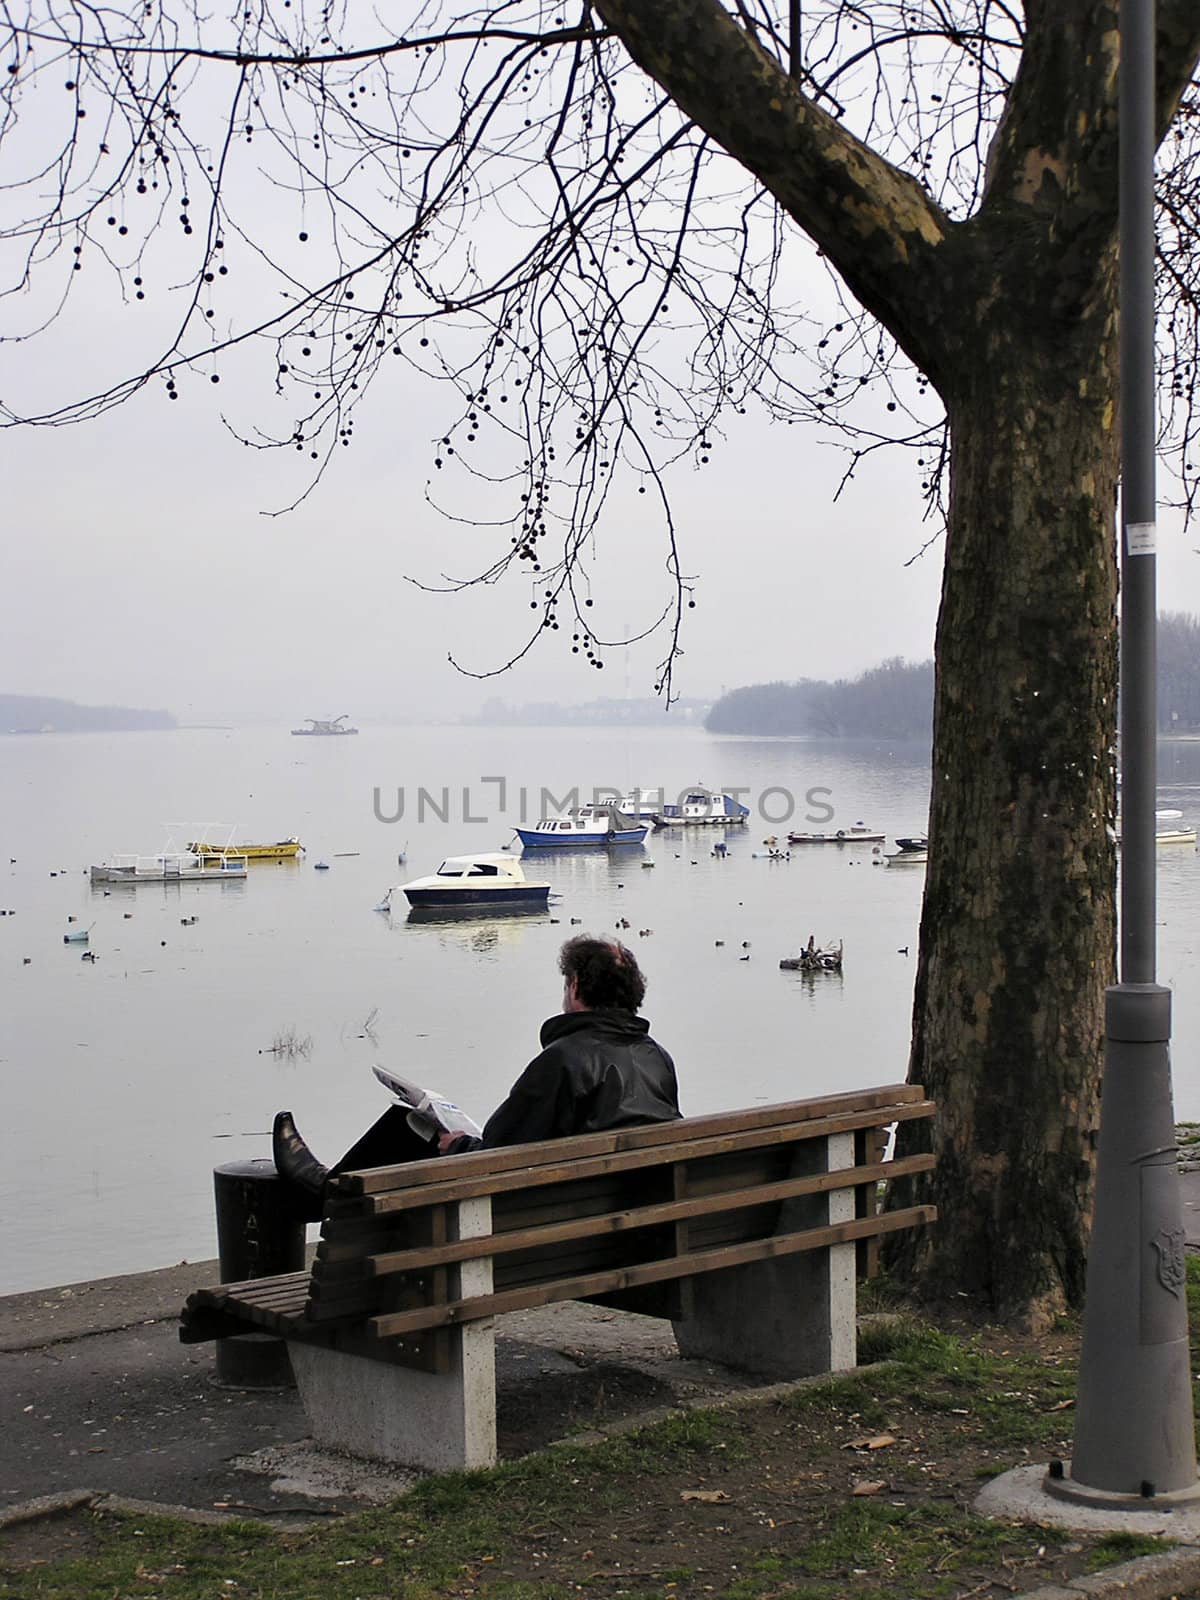 Man sitting on bench at river bank reading newspapers.